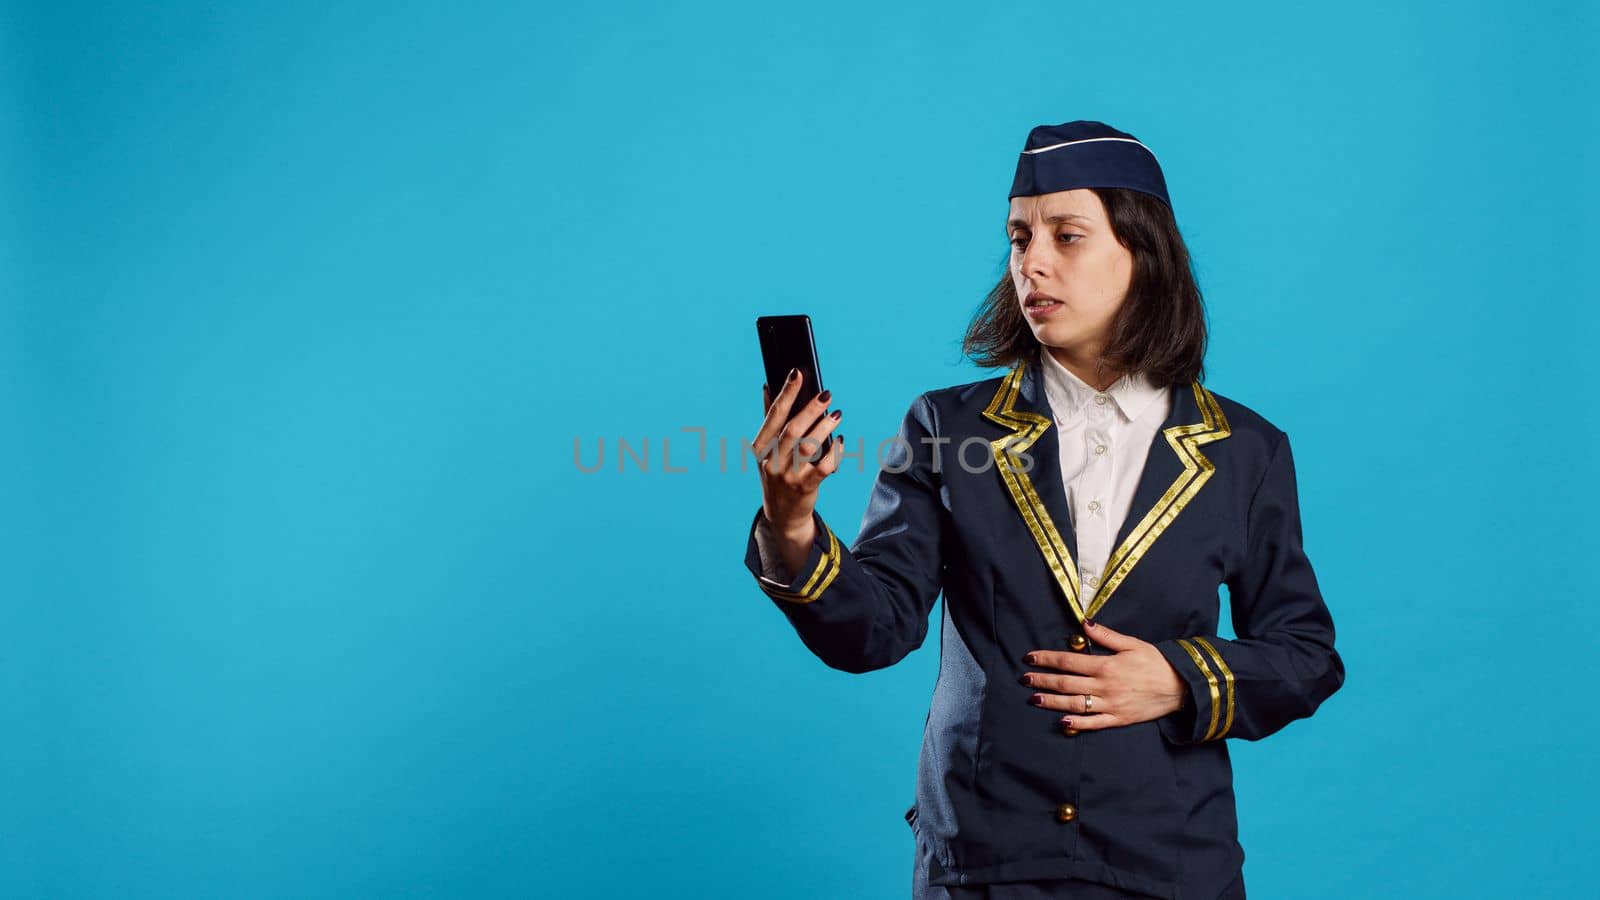 Air hostess attending online video call conference on smartphone, chatting on internet videoconference with webcam on camera. Young smiling stewardess talking on teleconference chat.